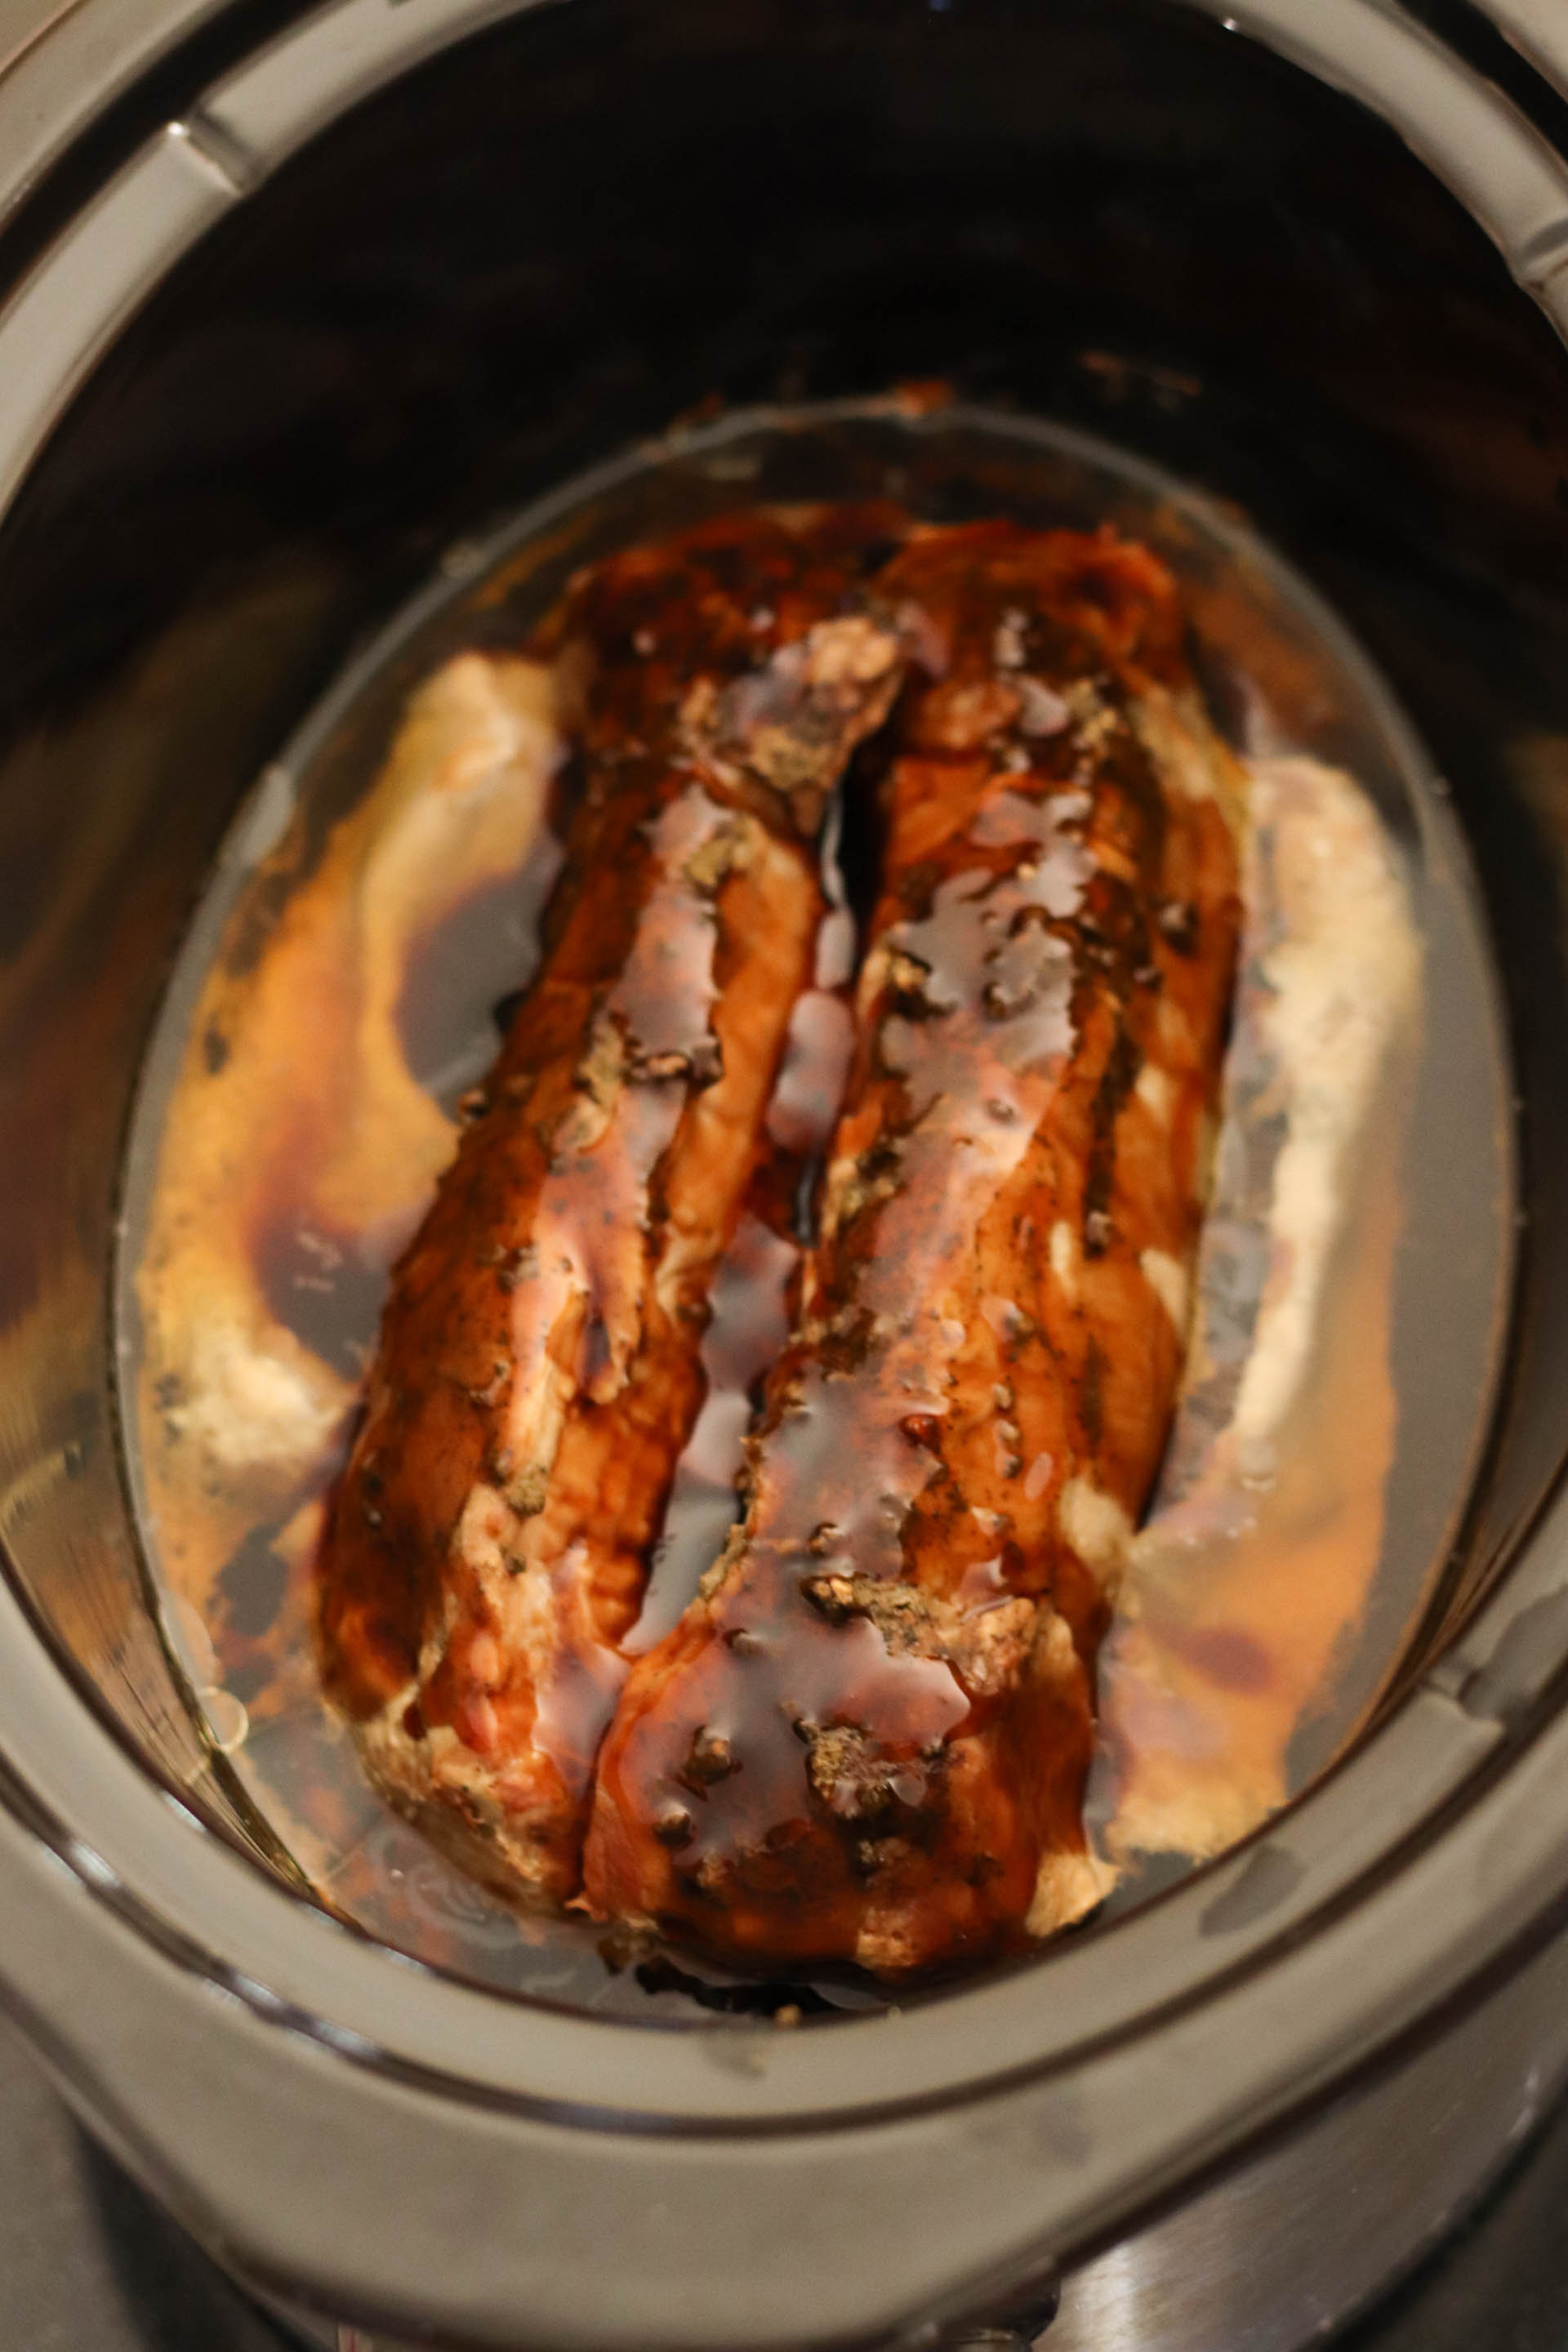 Slow Cooker Brown Sugar and Balsamic Glazed Pork Loin in the slow cooker